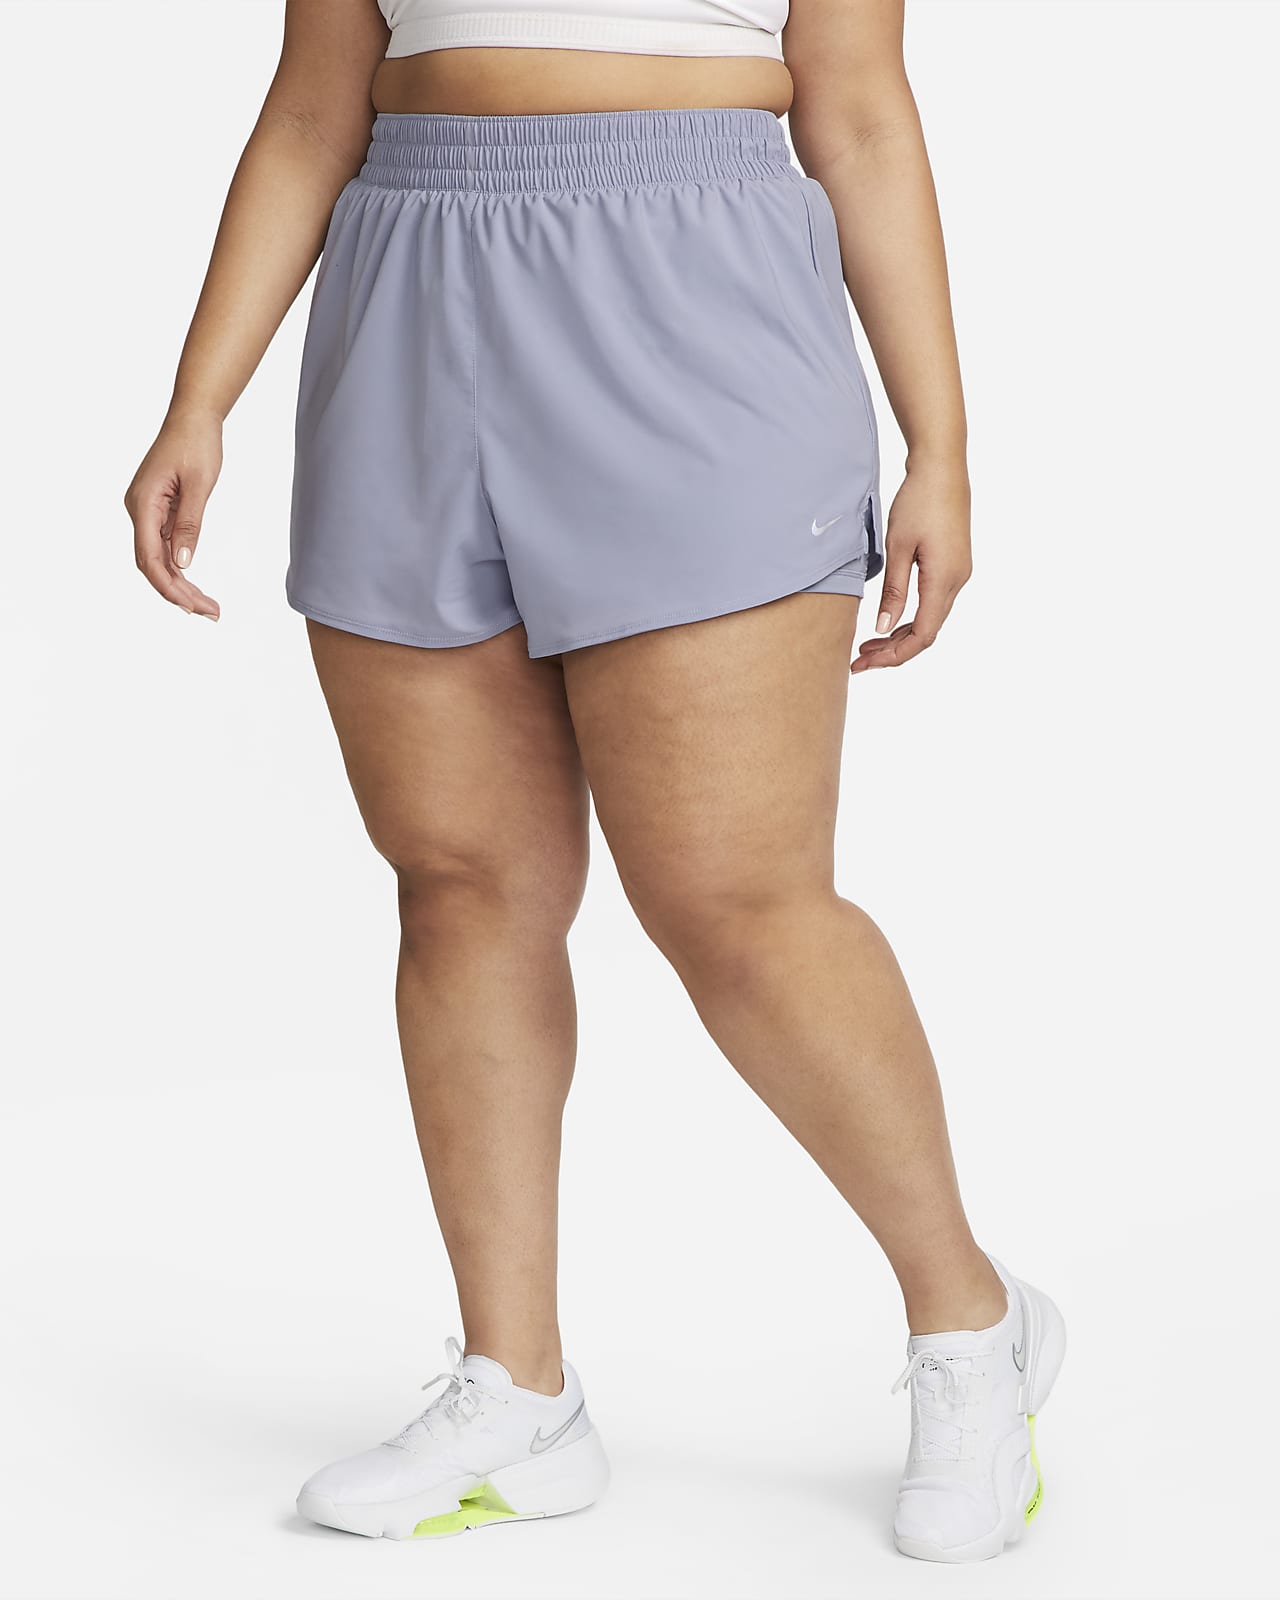 Nike Dri-FIT One Women's High-Waisted 3" 2-in-1 Shorts Size).